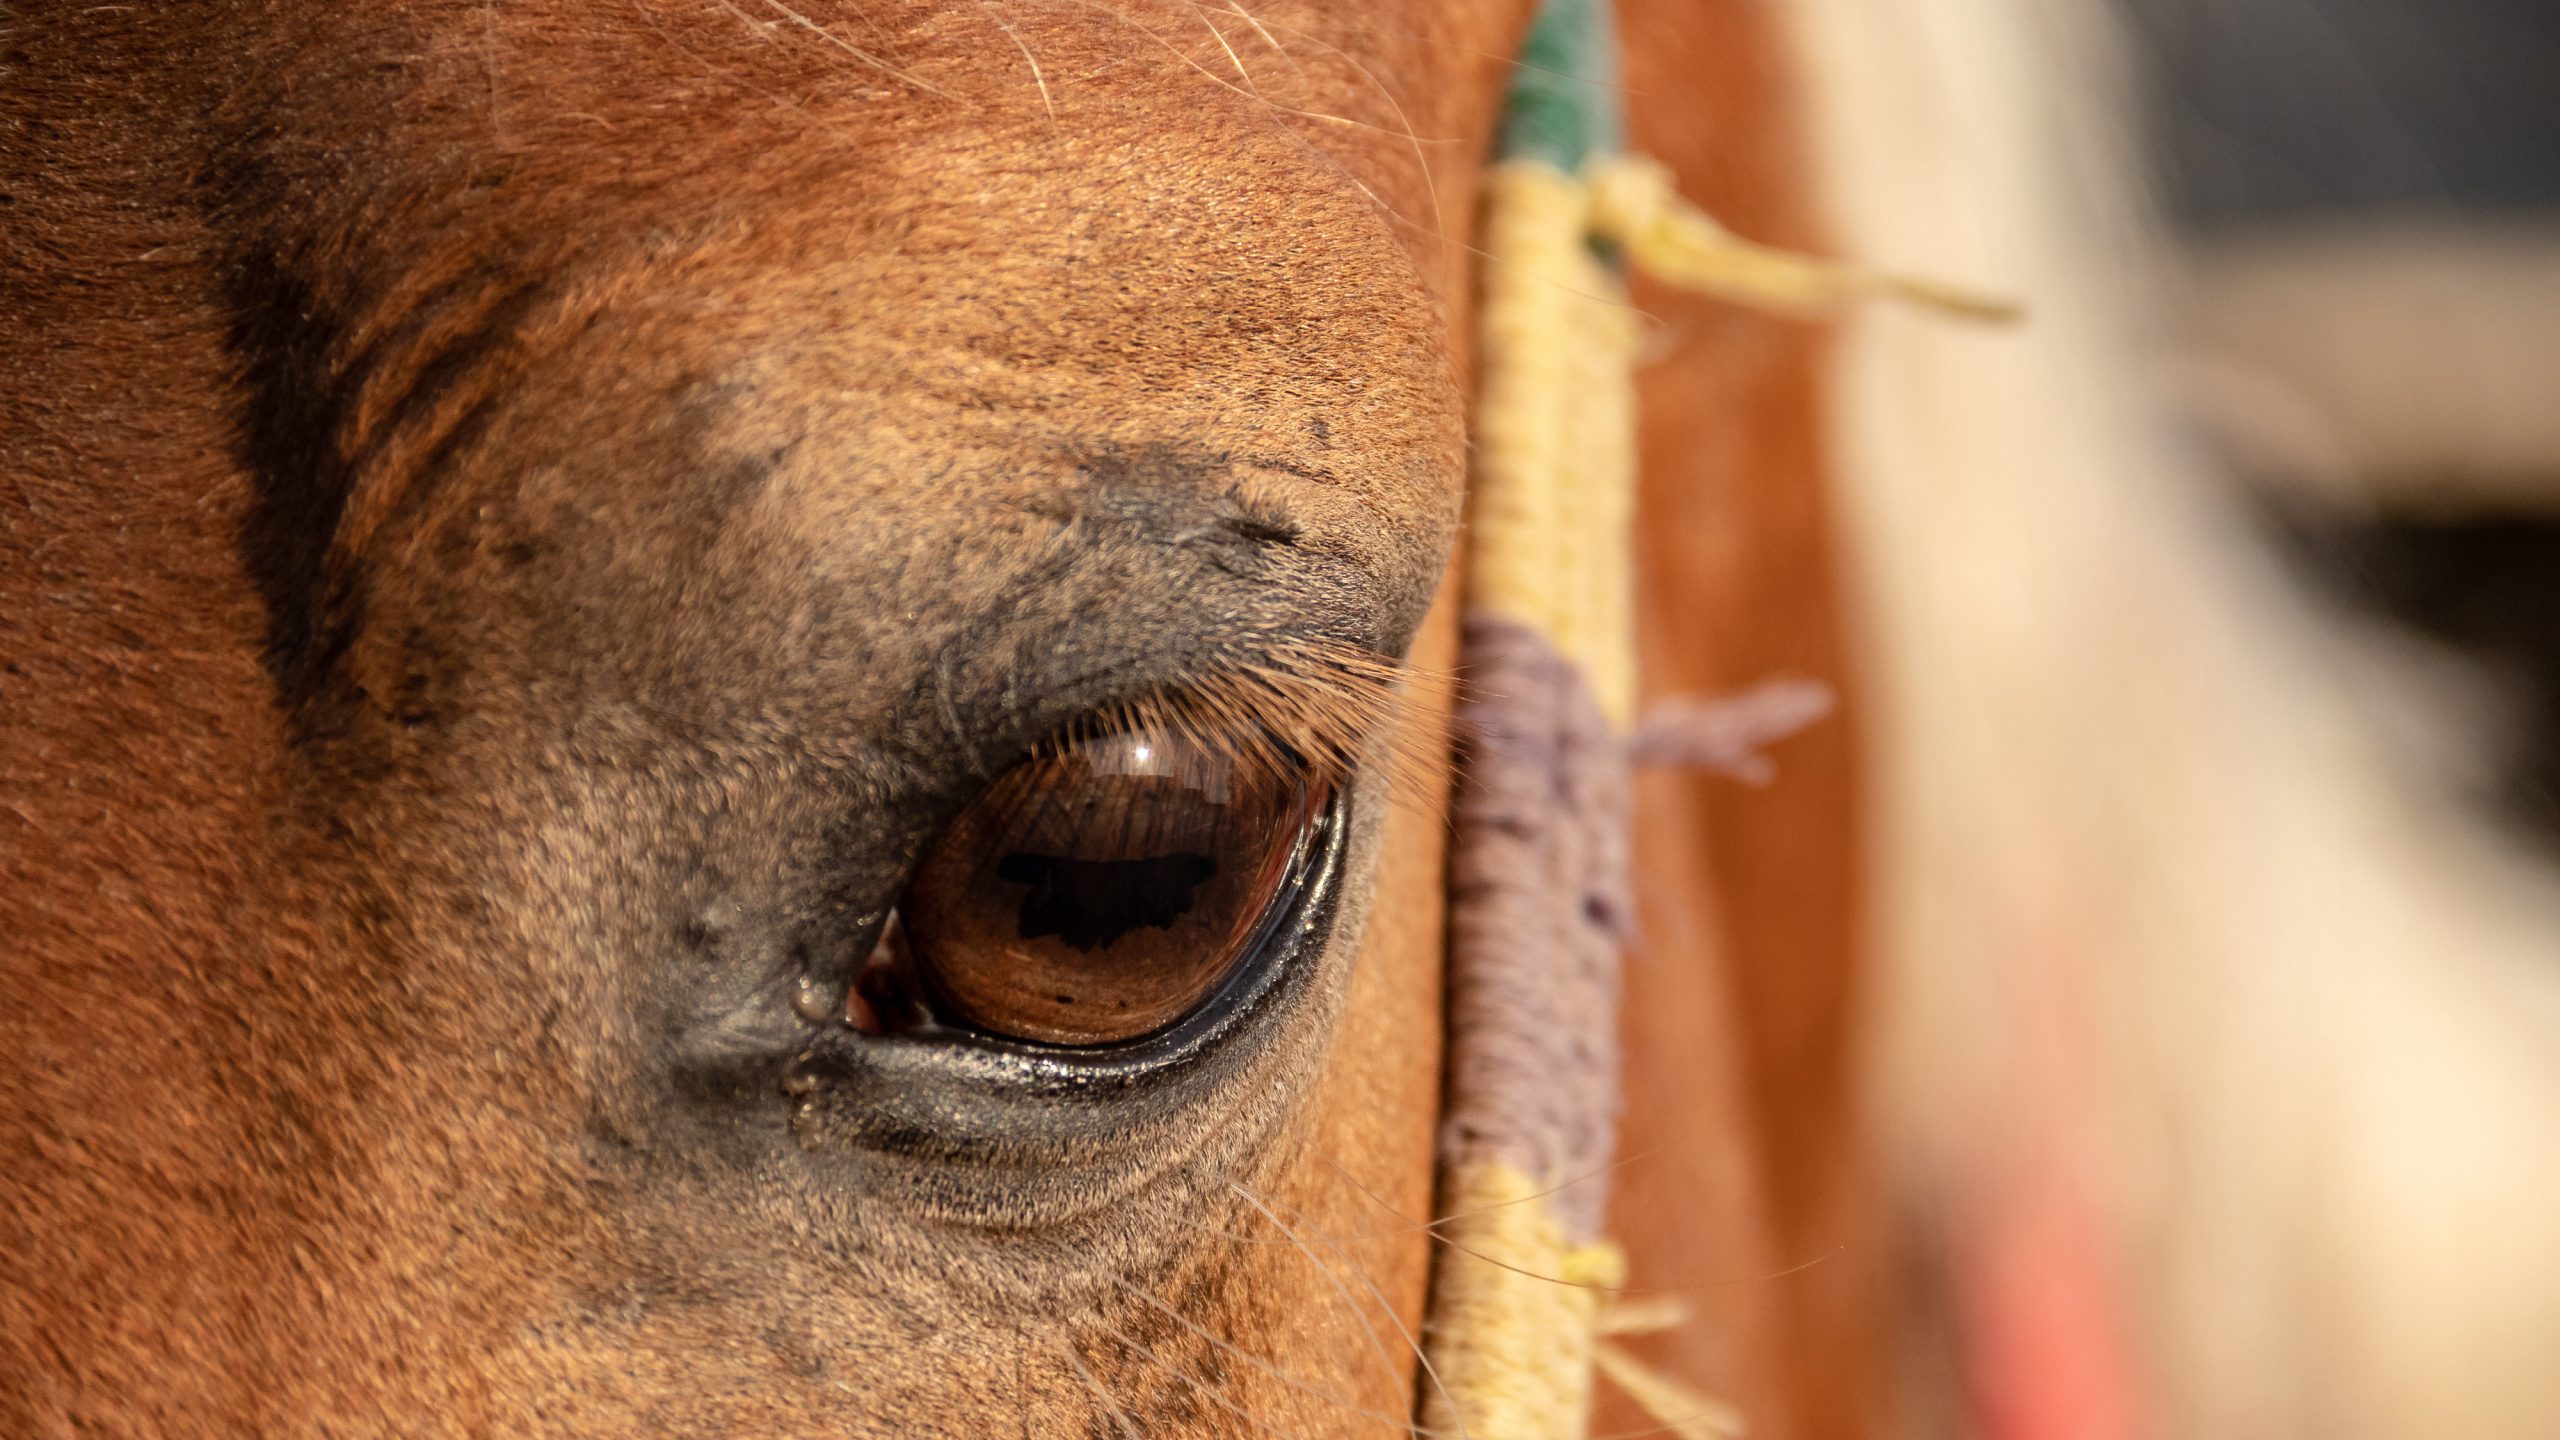 Hayavadana Promo Image, the close up of a brown cow's eye